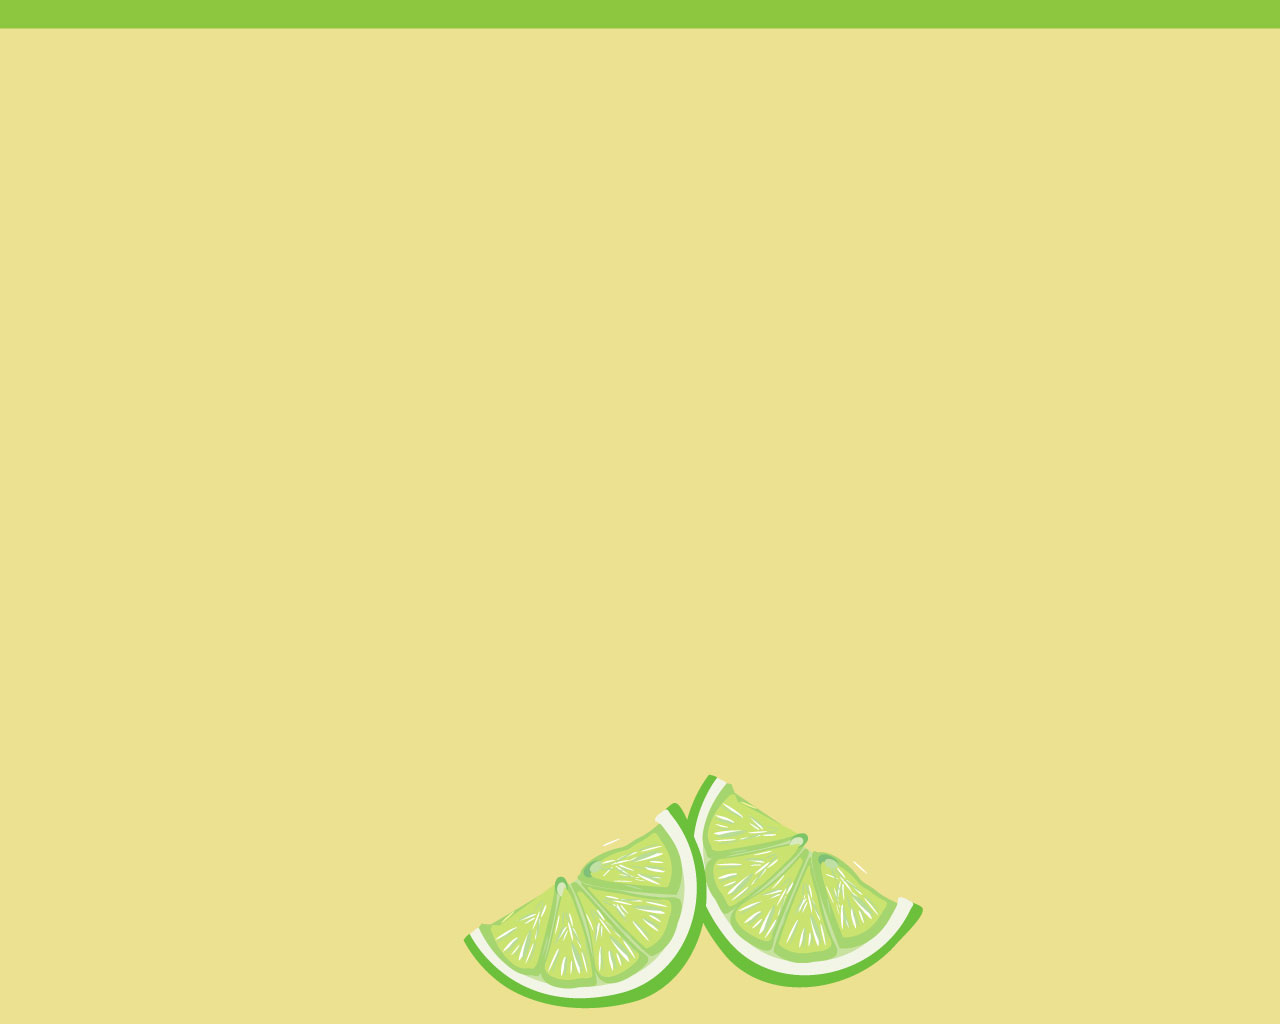 Lemon two slices Backgrounds powerpoint backgrounds